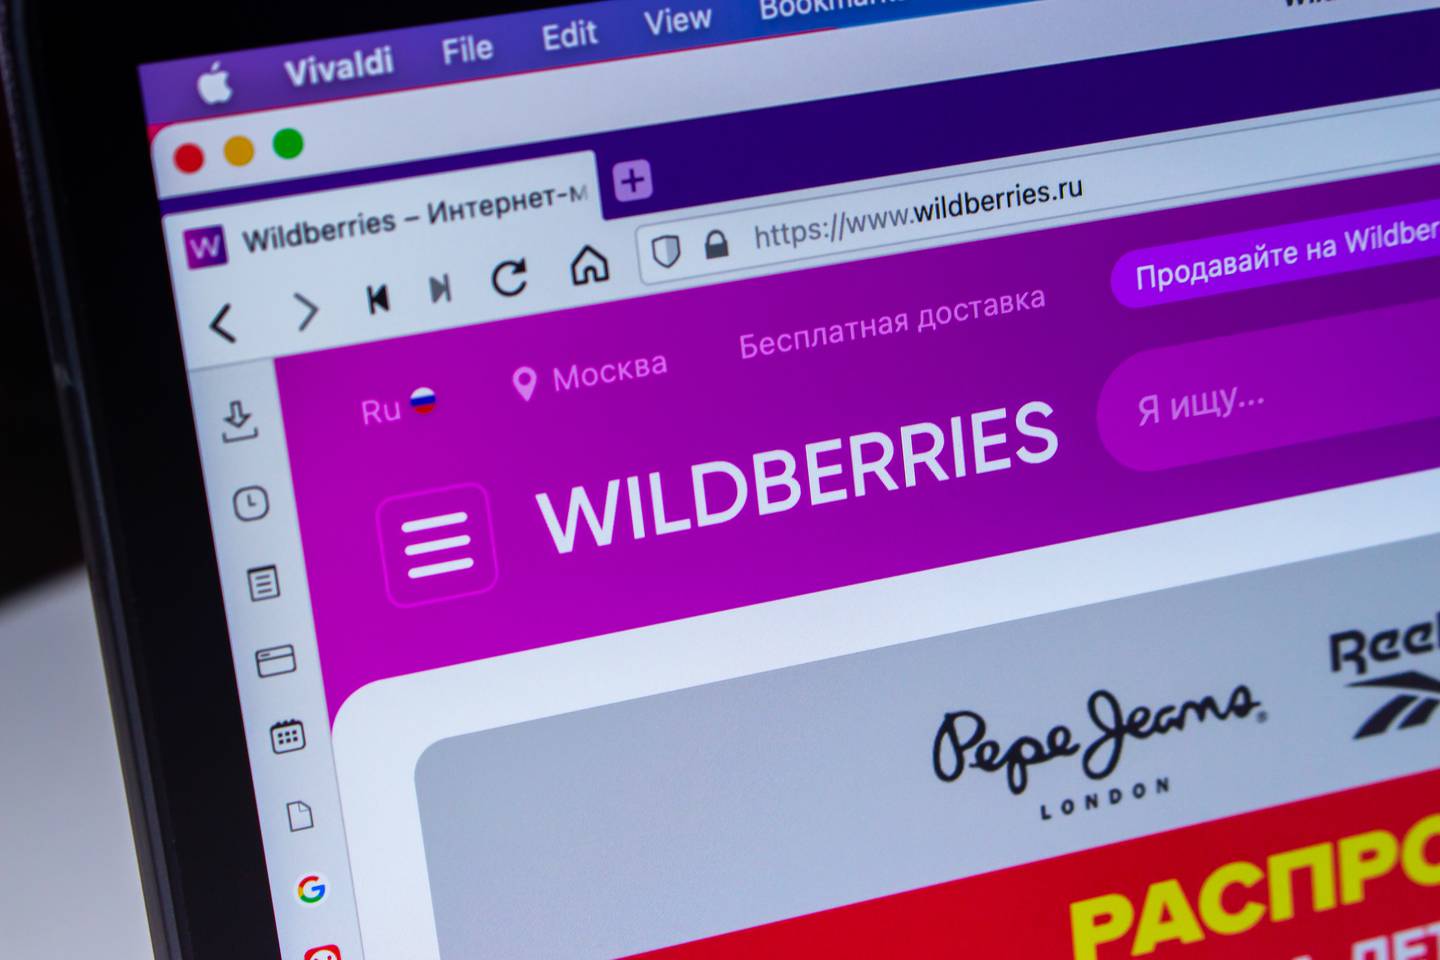 Wildberries has changed its policies so it's effectively cheaper for consumers to purchase using domestic payment platforms. Shutterstock